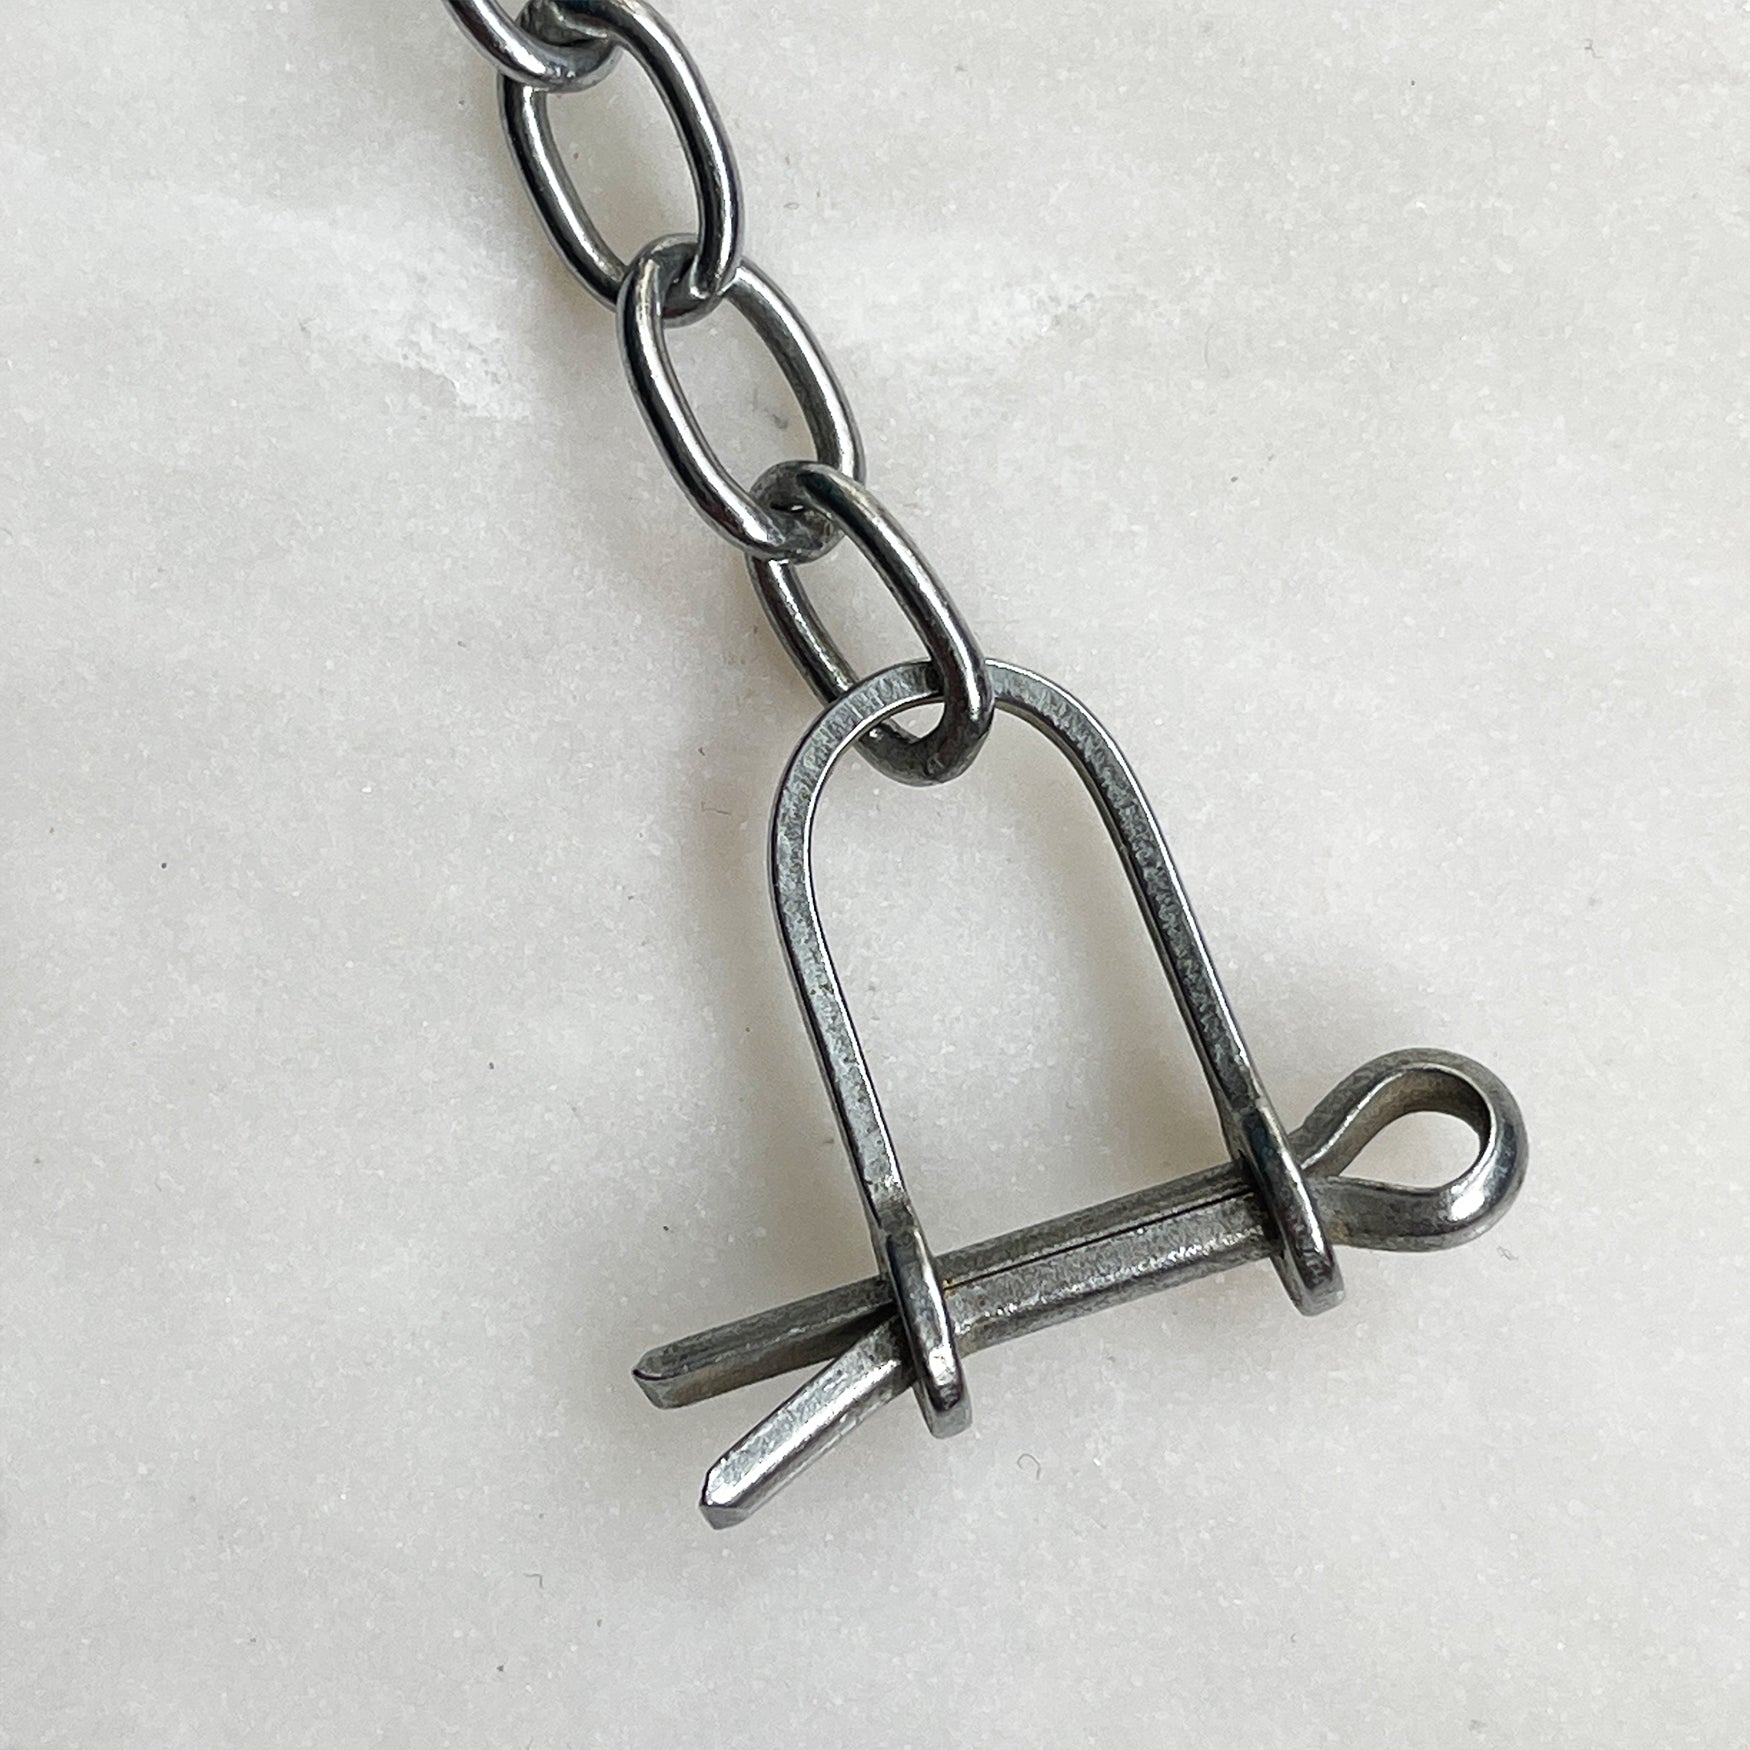 A Vintage Fordham Ceramic Toilet Chain Pull. with nickle plated chain - SHOP NOW - www.intovintage.co.uk